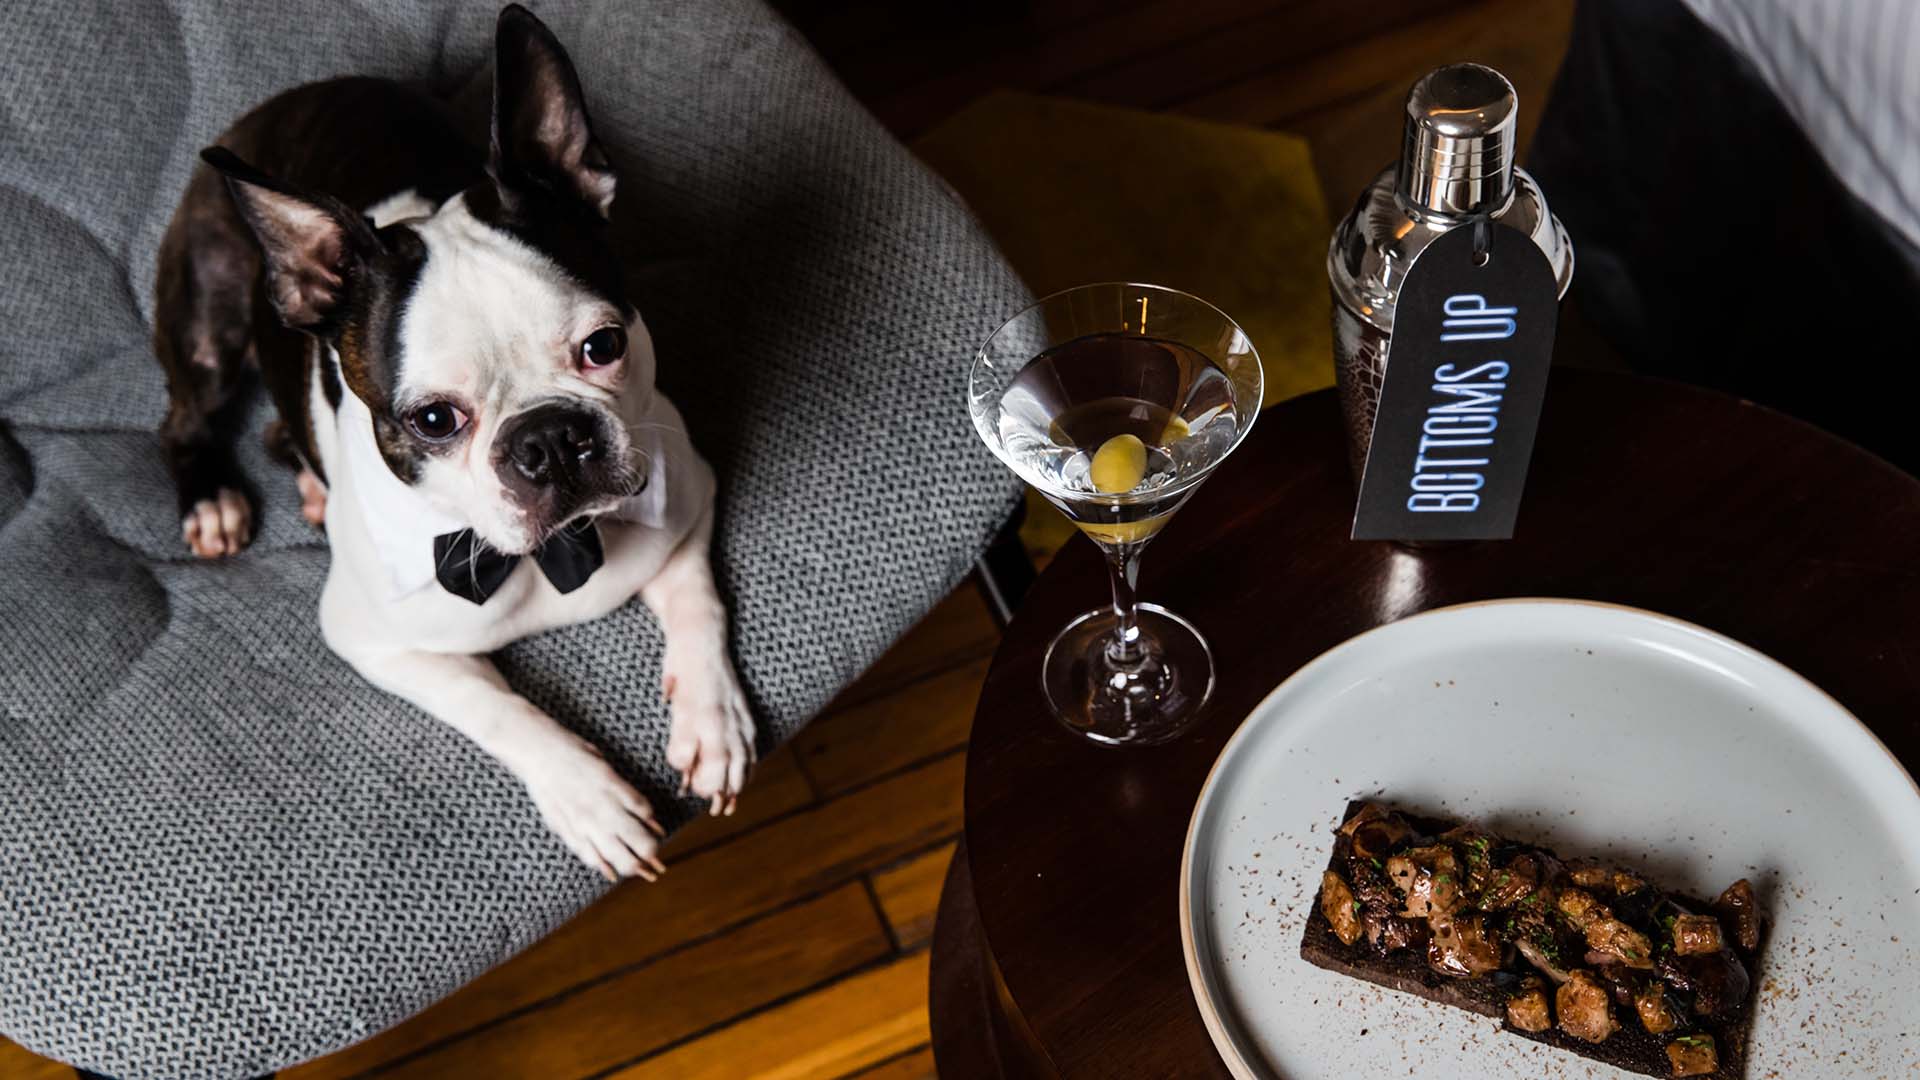 You Can Now Take Your Pooch for an Indulgent Sleepover at QT's Australian and New Zealand Hotels